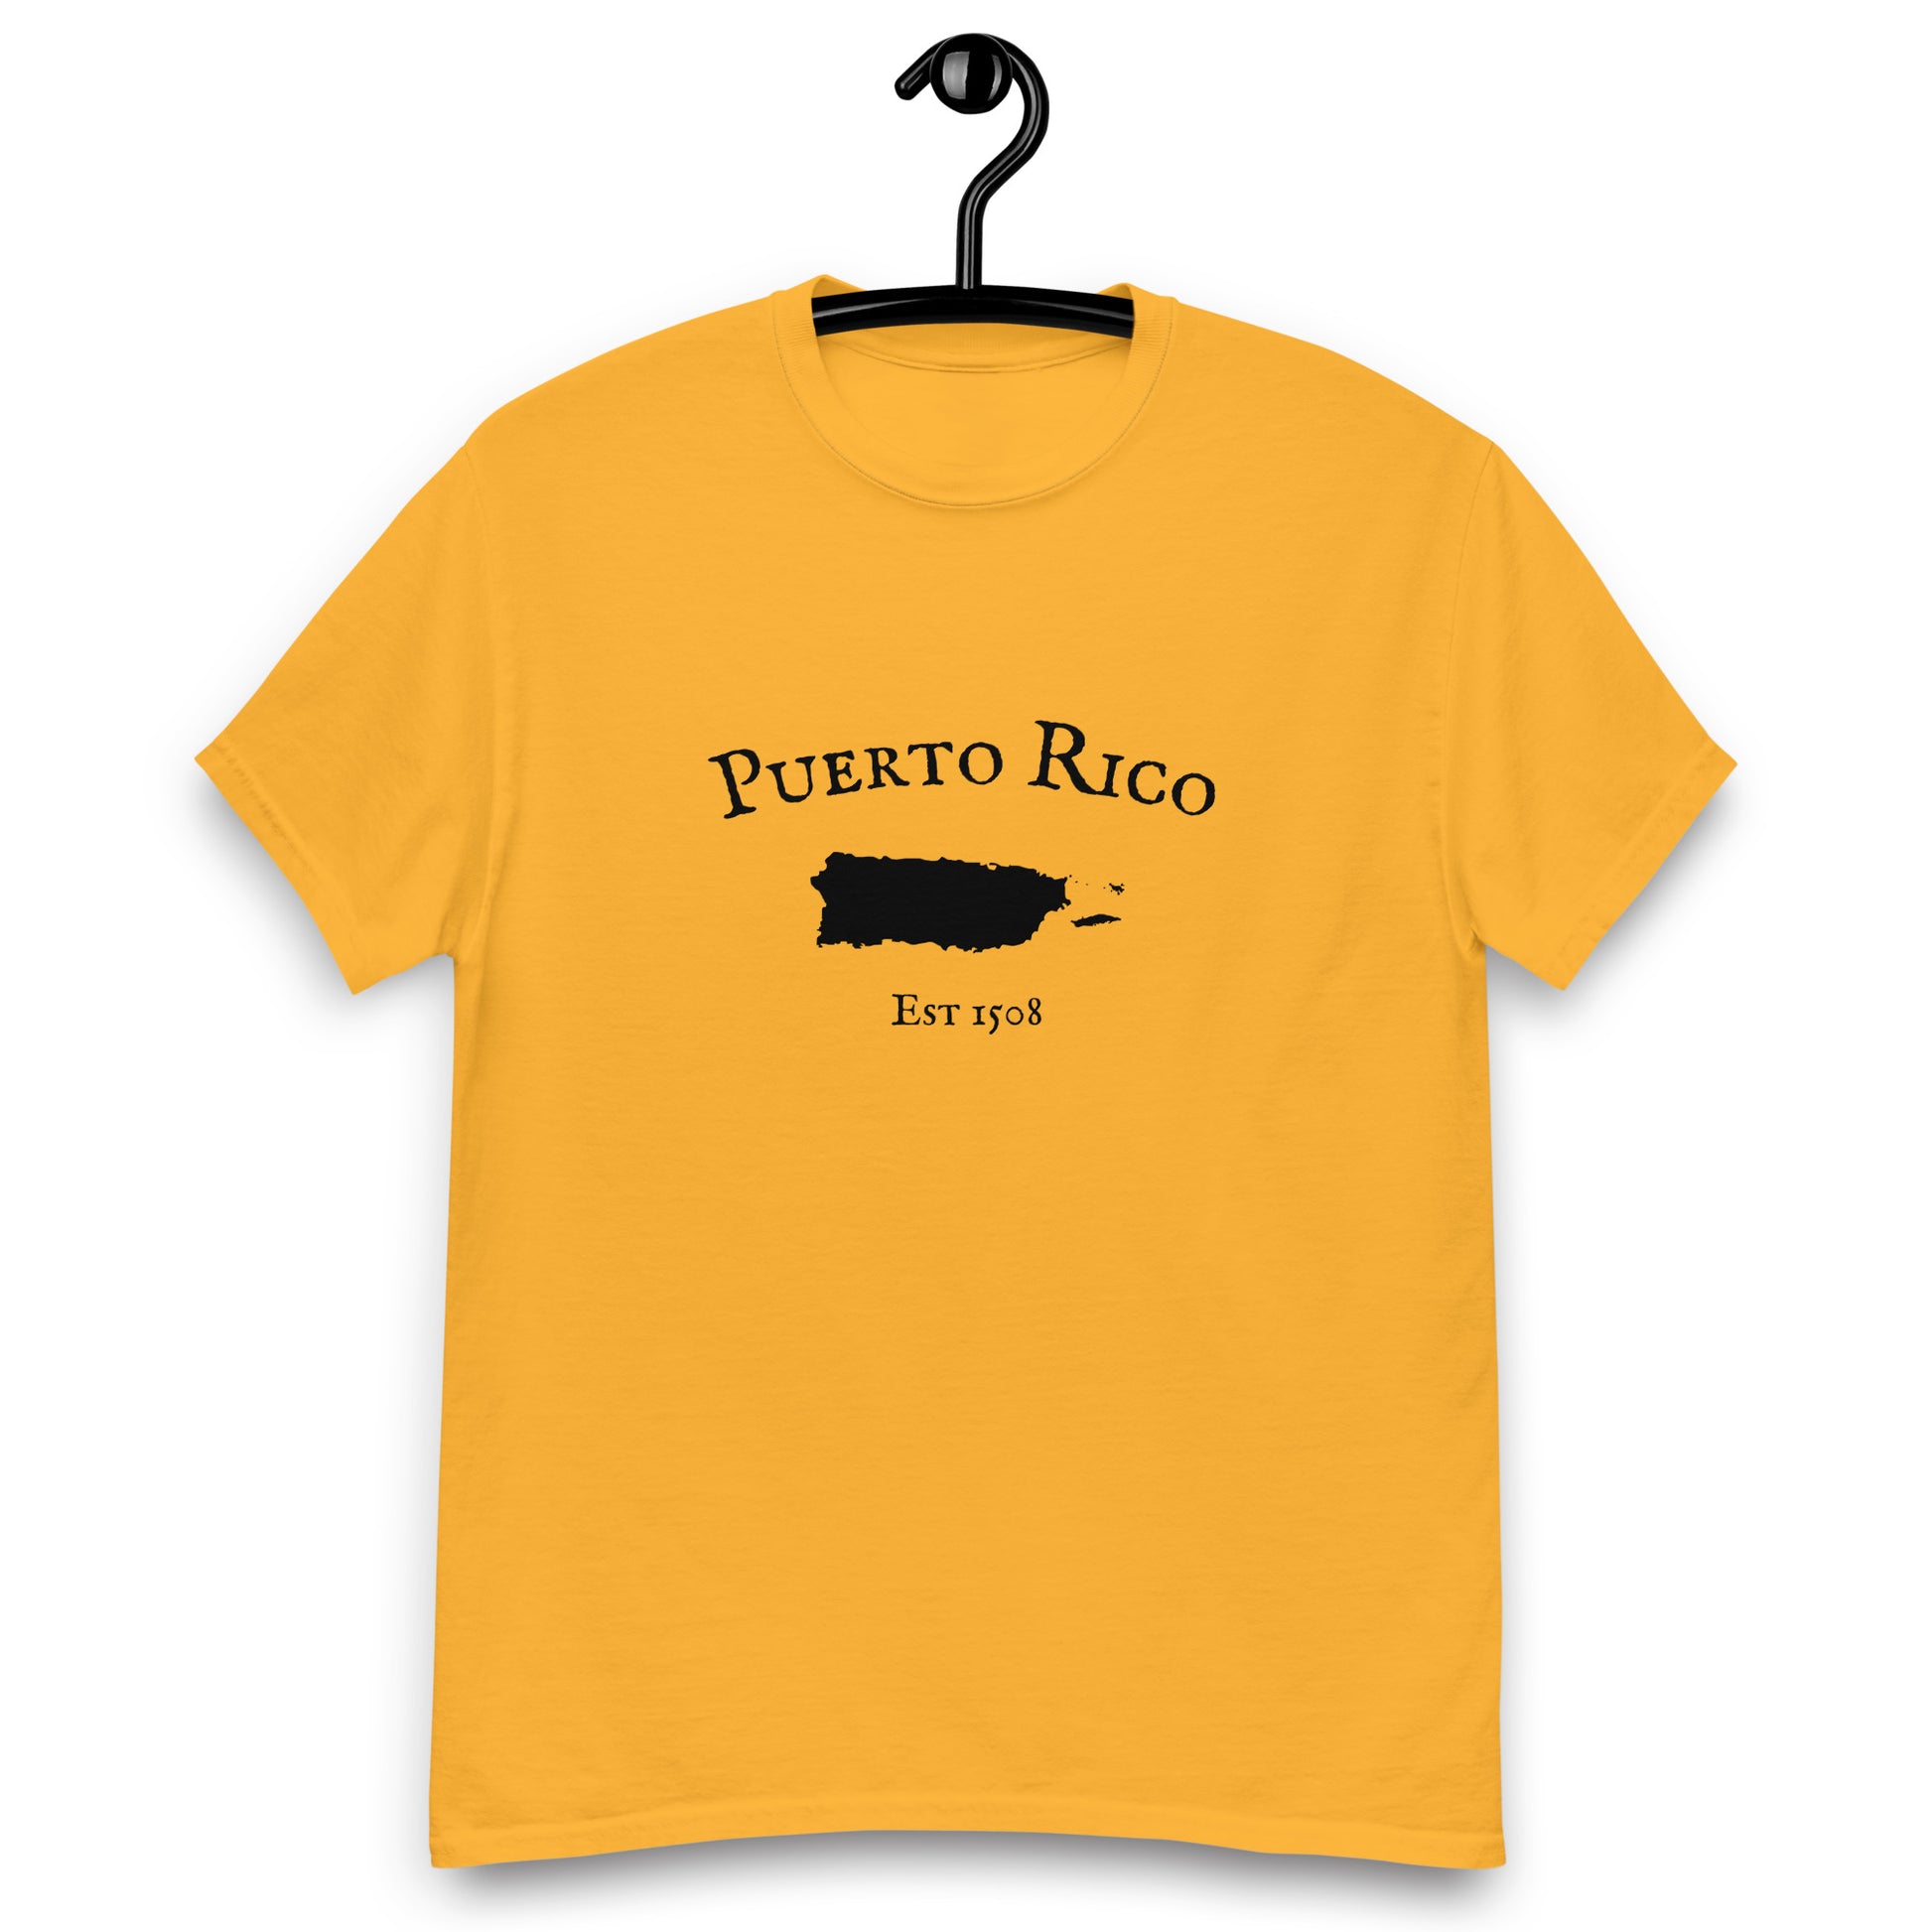 Eco-friendly made-to-order "Puerto Rico 1508" men's tee